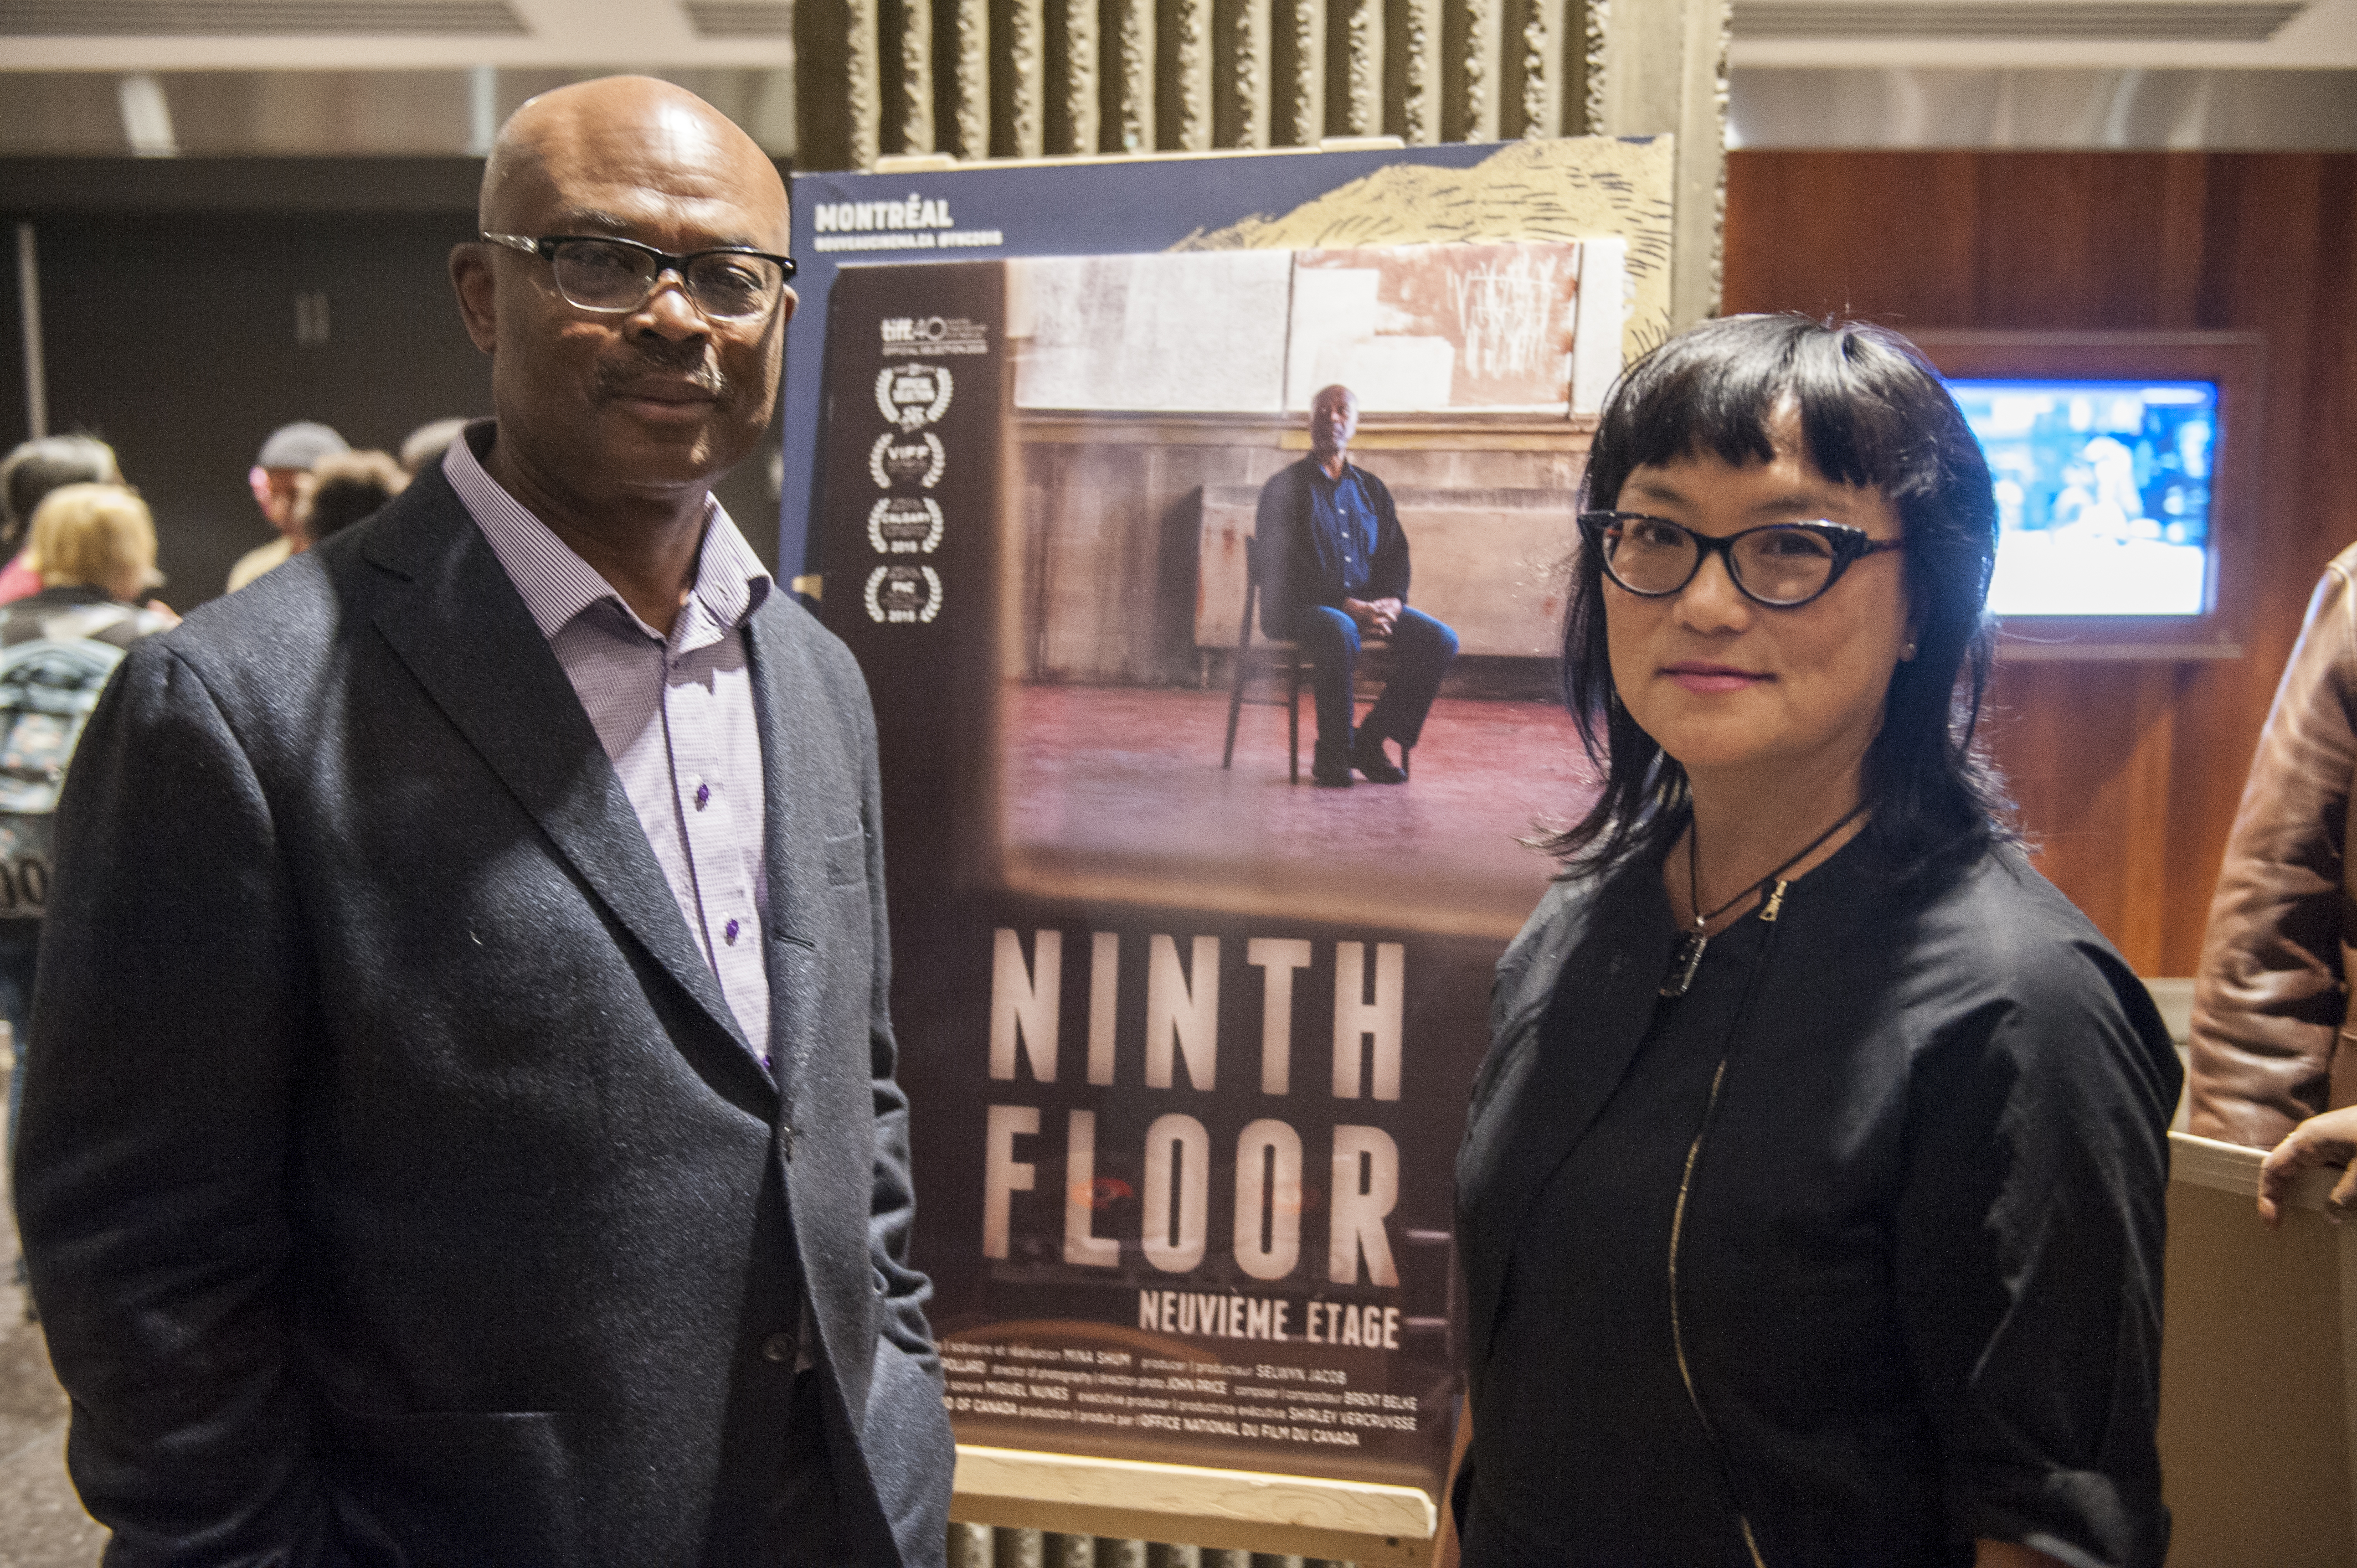 Producer Selwyn Jacob and director Mina Shum pose outside Hall Theatre following the screening. Photo by Andrej Ivanov.